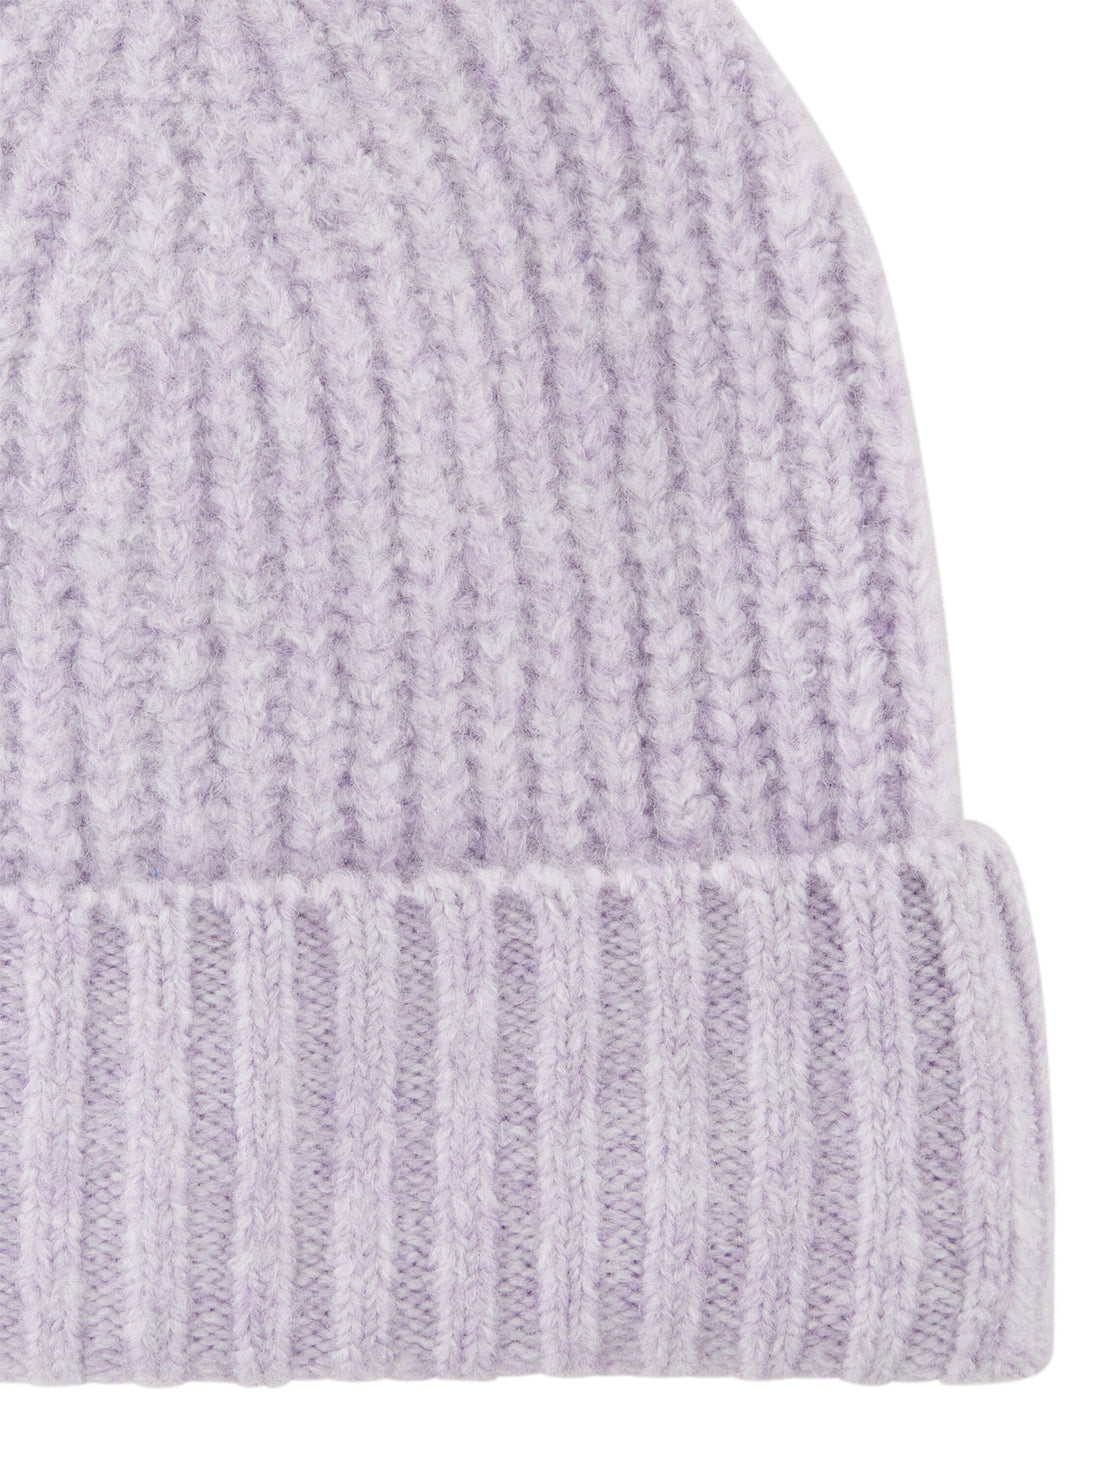 Knitted Hat_1039756_33805_02